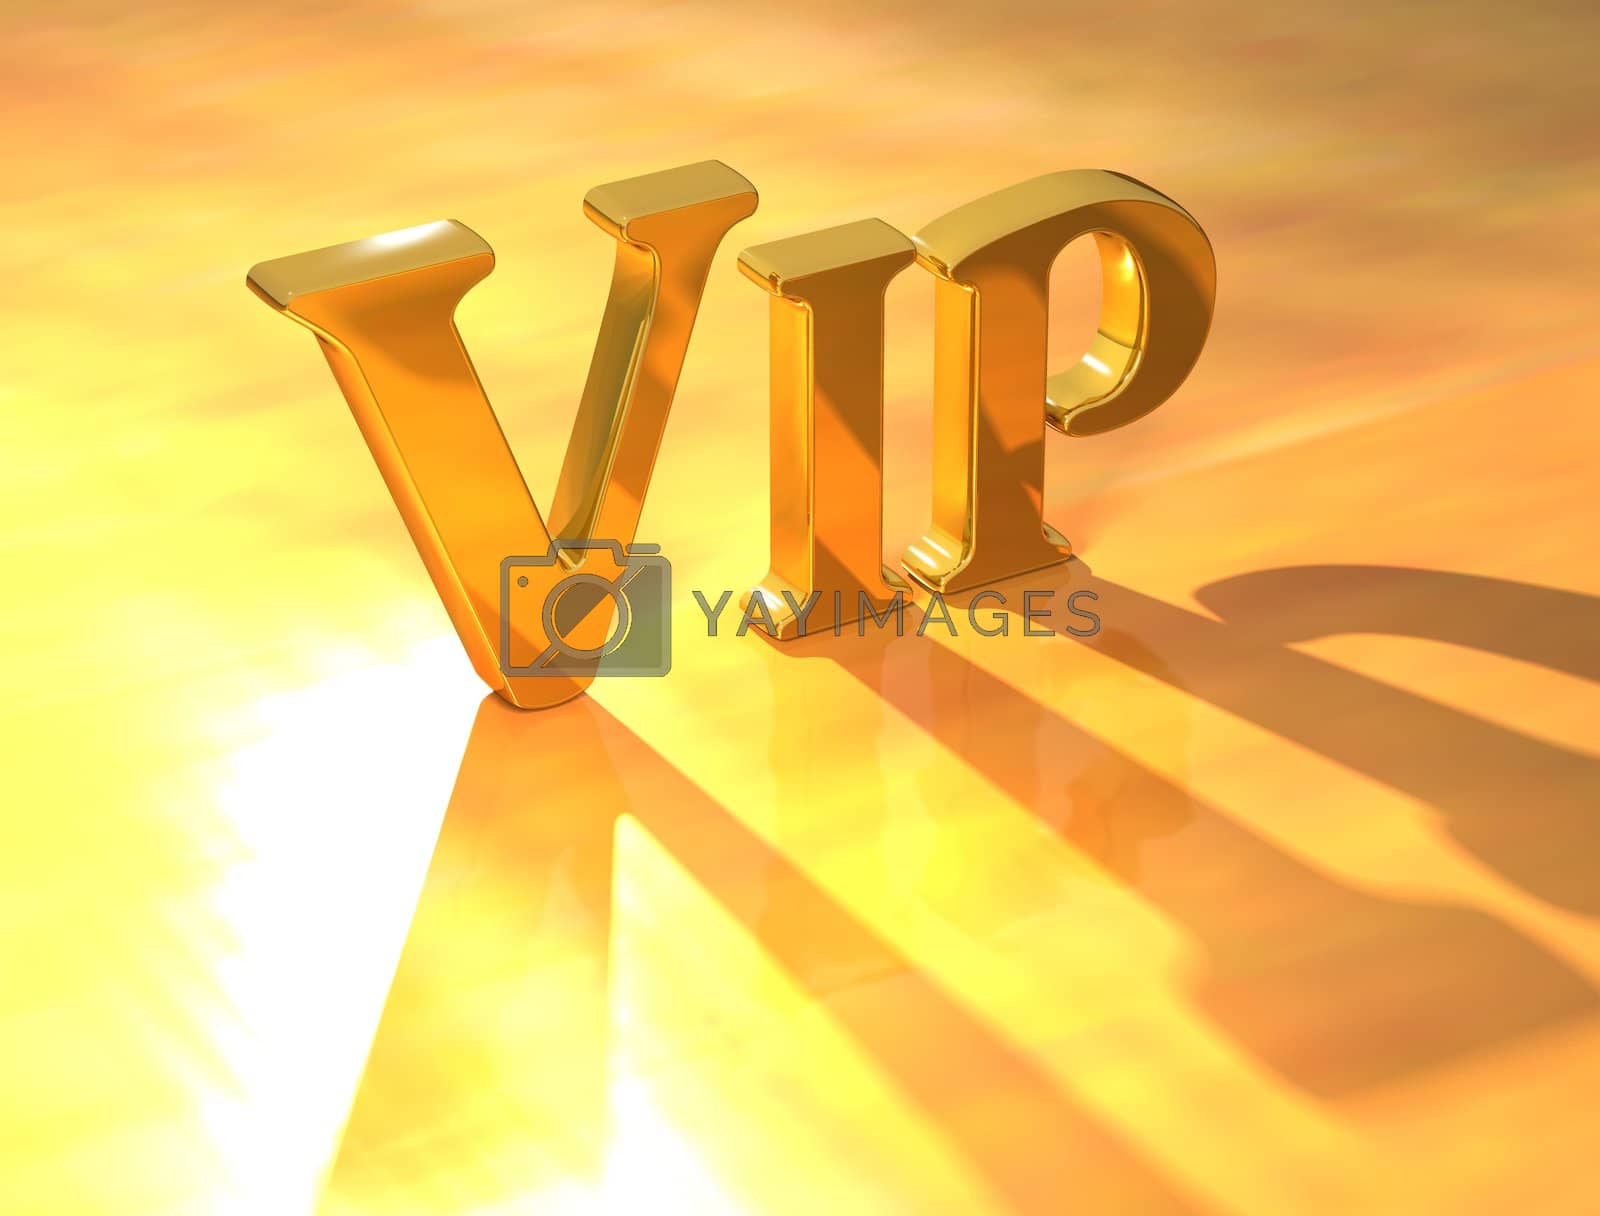 Royalty free image of Vip Gold Text by mariusz_prusaczyk